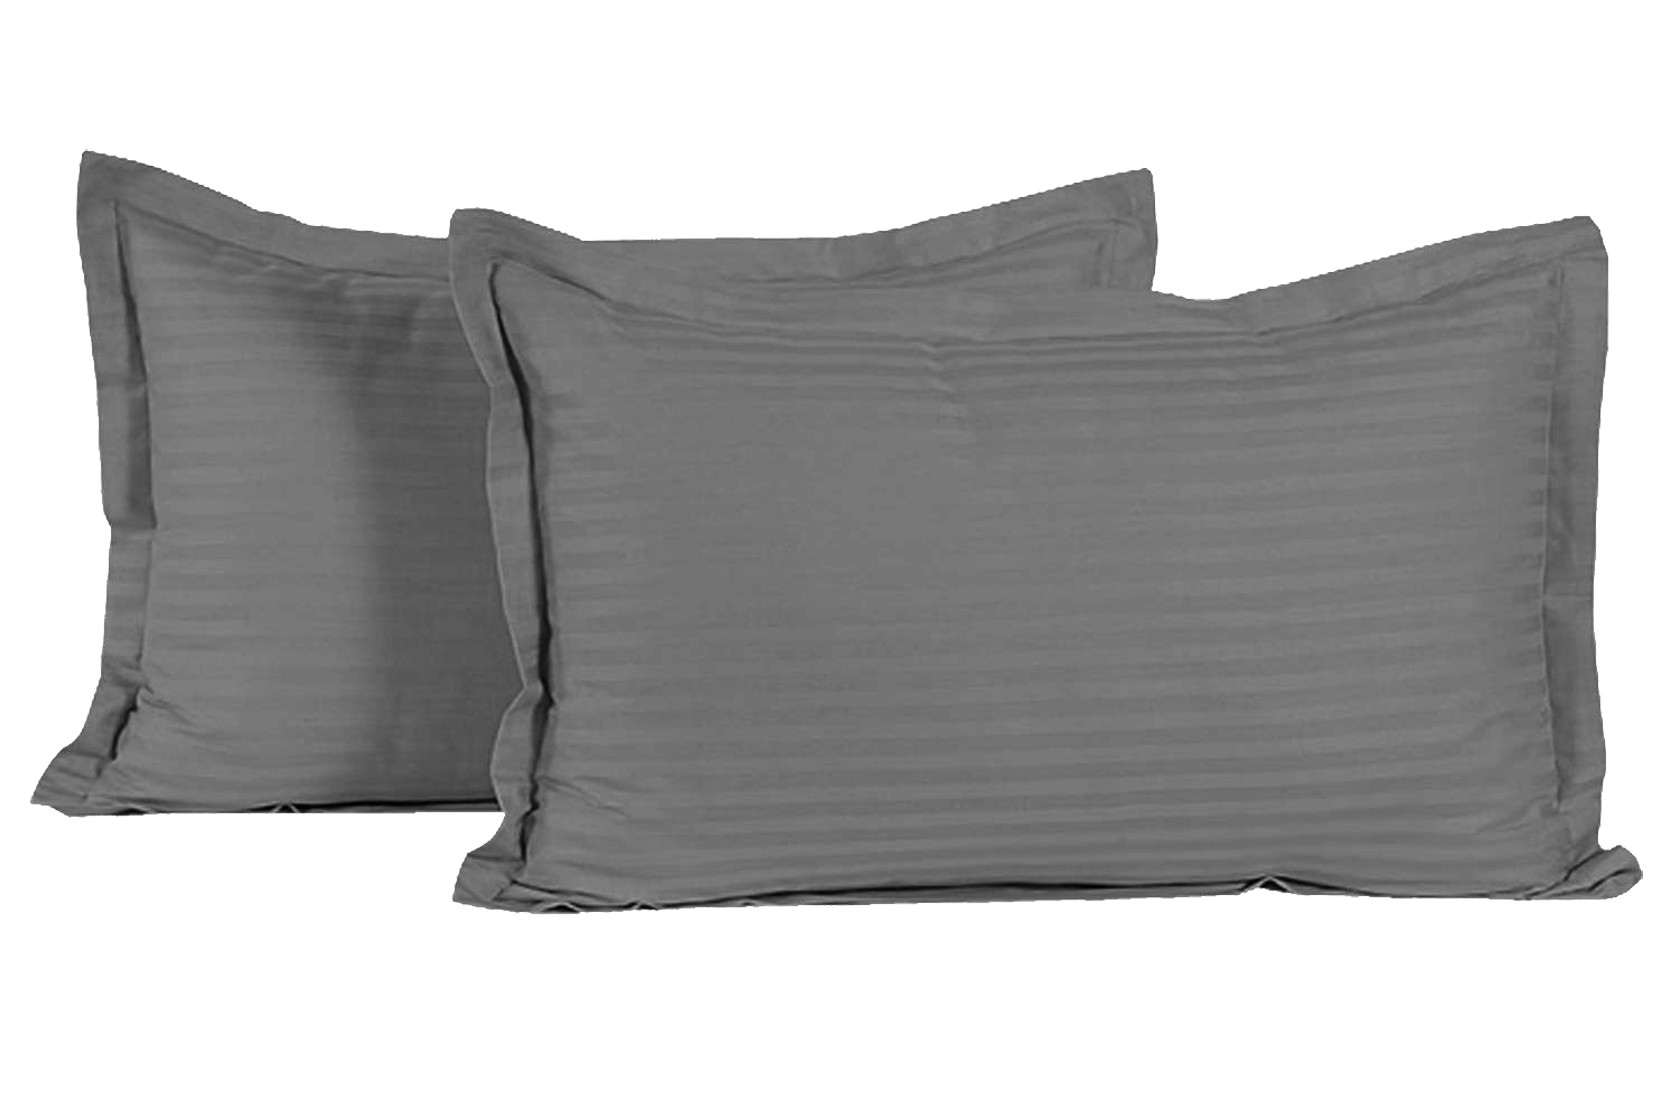 Kuber Industries Lining Design Breathable & Soft Cotton Pillow Cover/Protector/Case- 18x28 Inch,(Grey)-HS43KUBMART26755